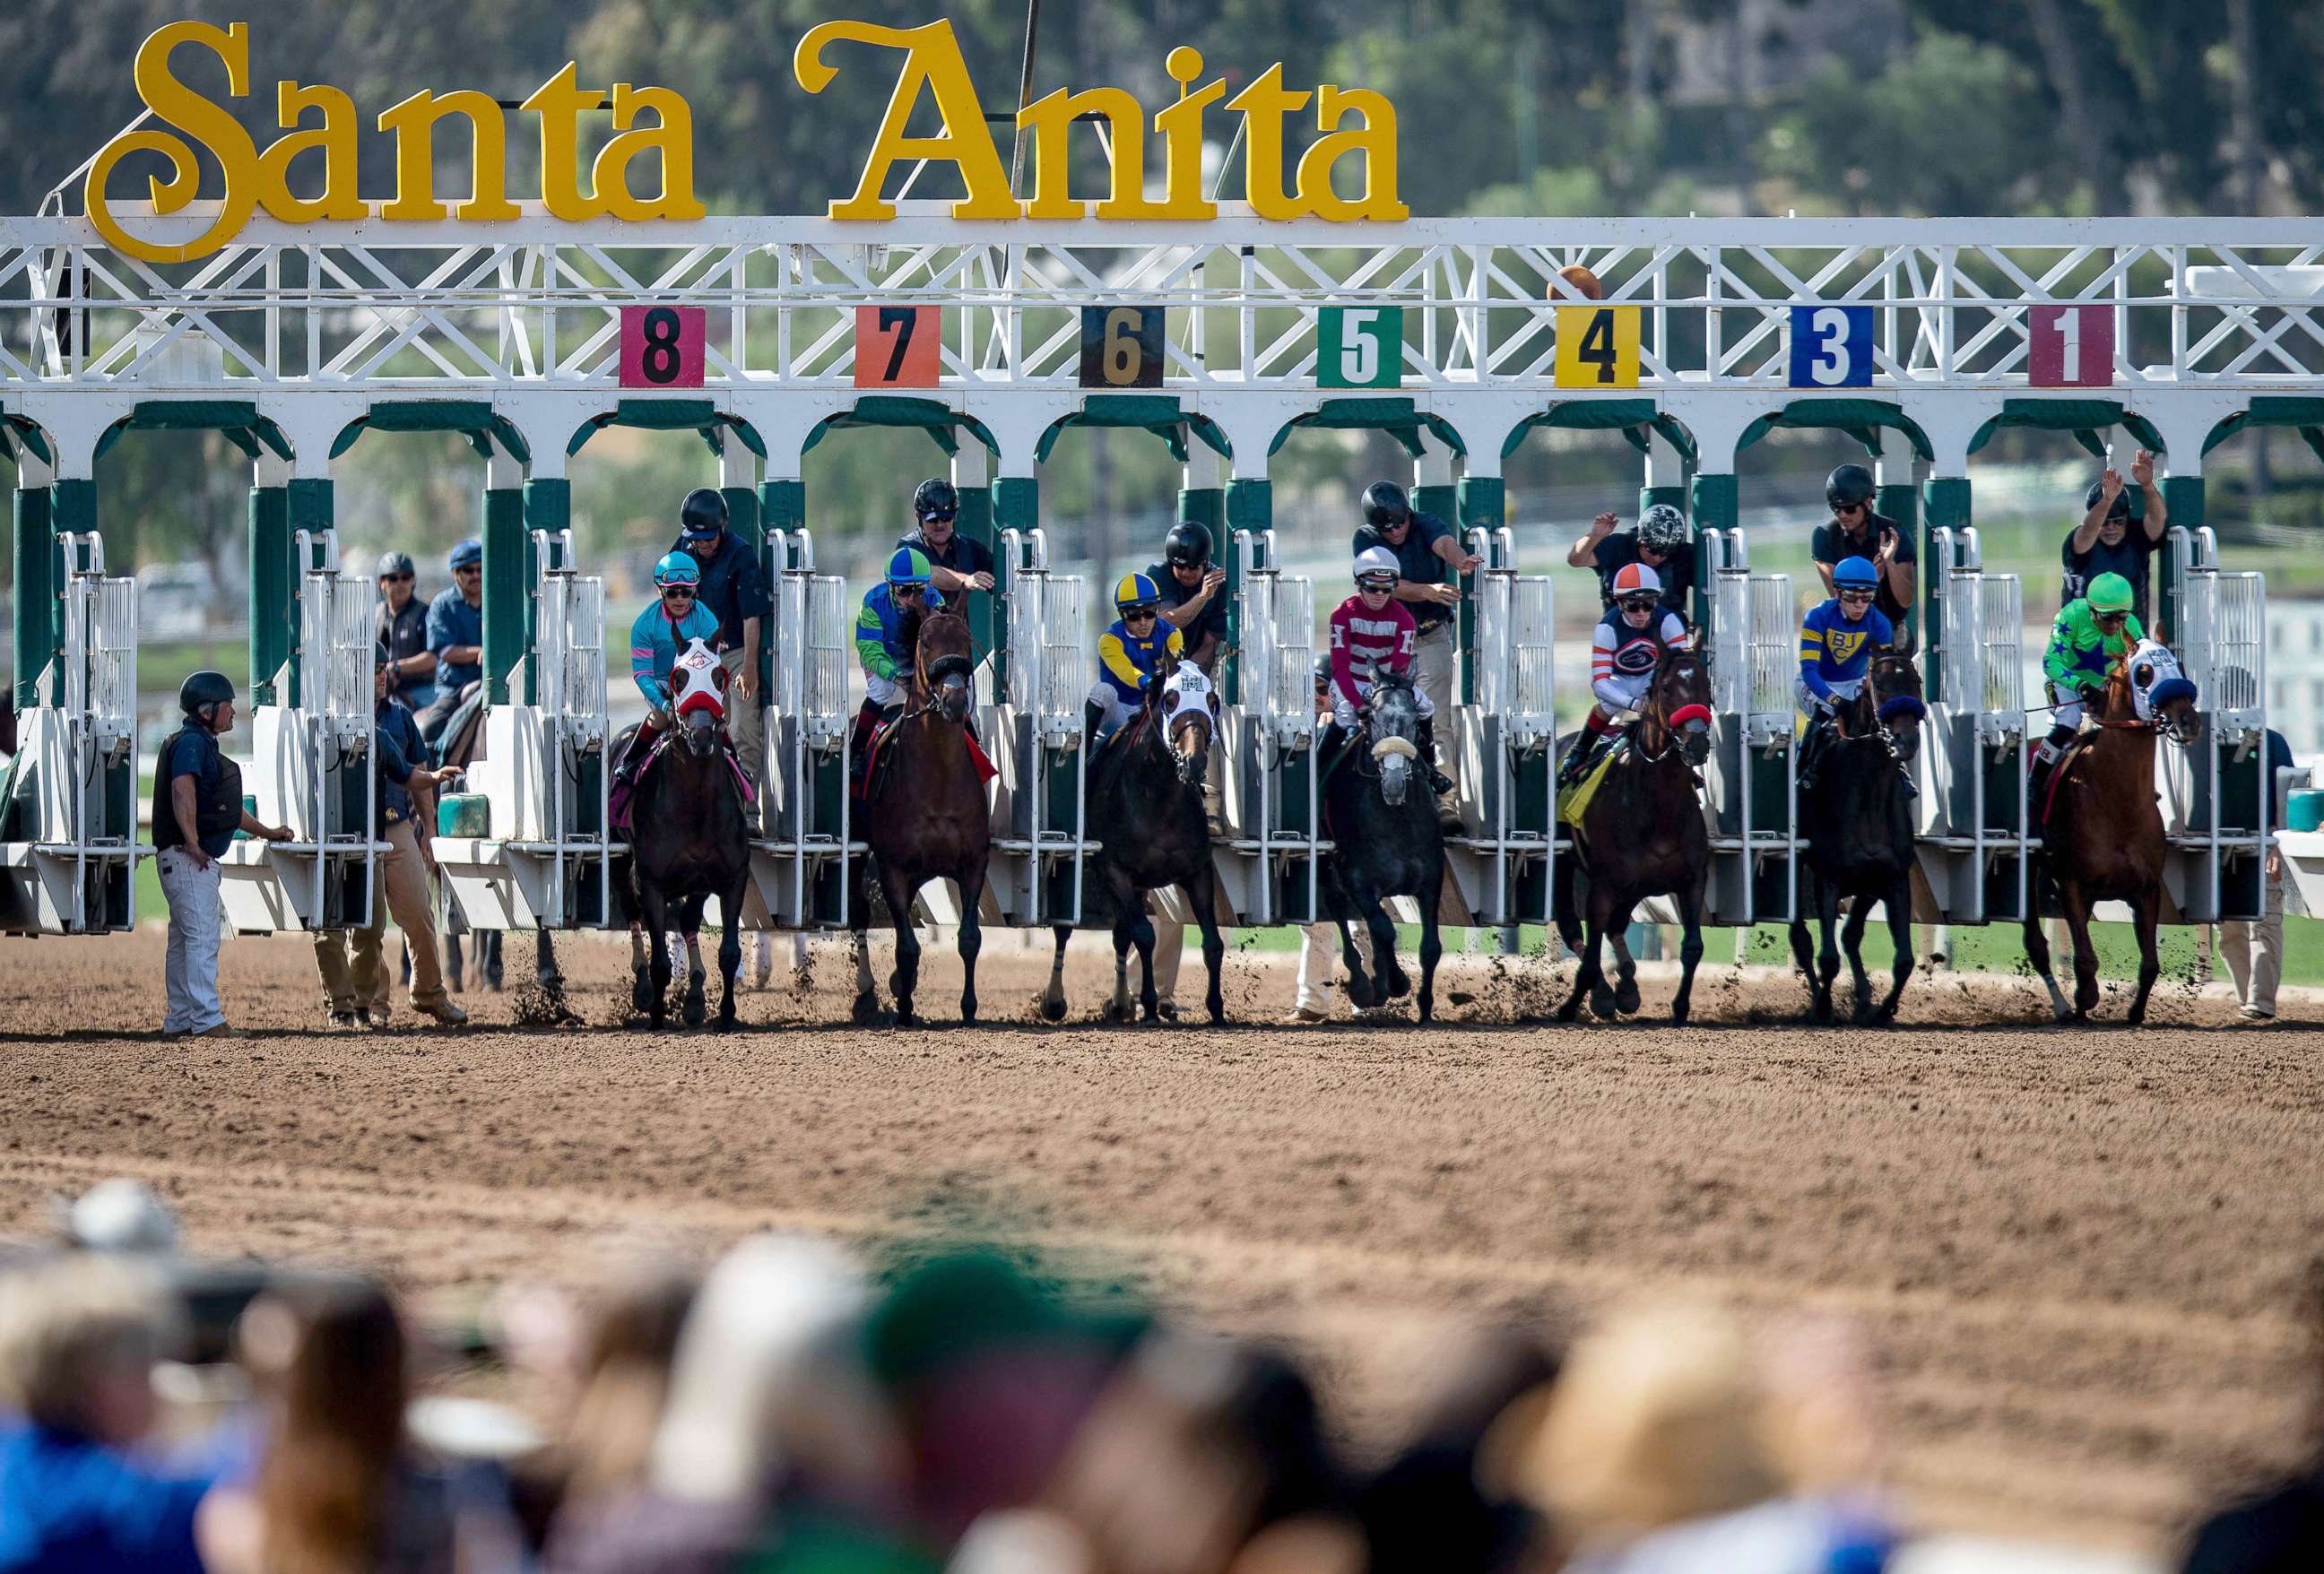 Task force to investigate Santa Anita track where 23 racehorses died